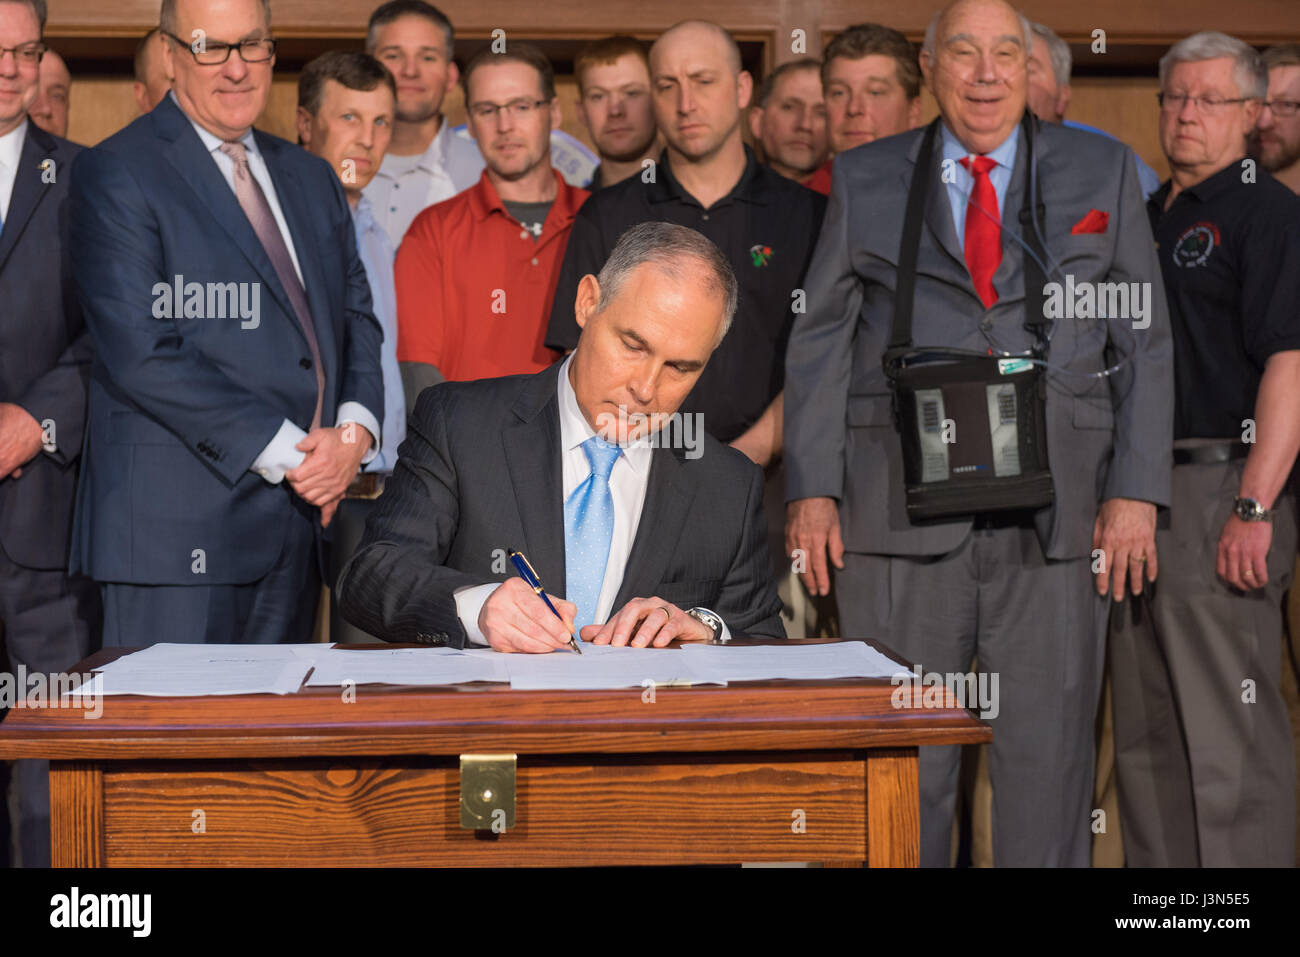 U.S. EPA Administrator Scott Pruitt, center, adds his signature to the Promoting Energy Independence Executive Order during a signing ceremony at the Environmental Protection Agency headquarters March 28, 2017 in Washington, DC. The order rolls back at least 10 major Obama environmental regulations and fulfills a wish list from the fossil fuel industry. Stock Photo